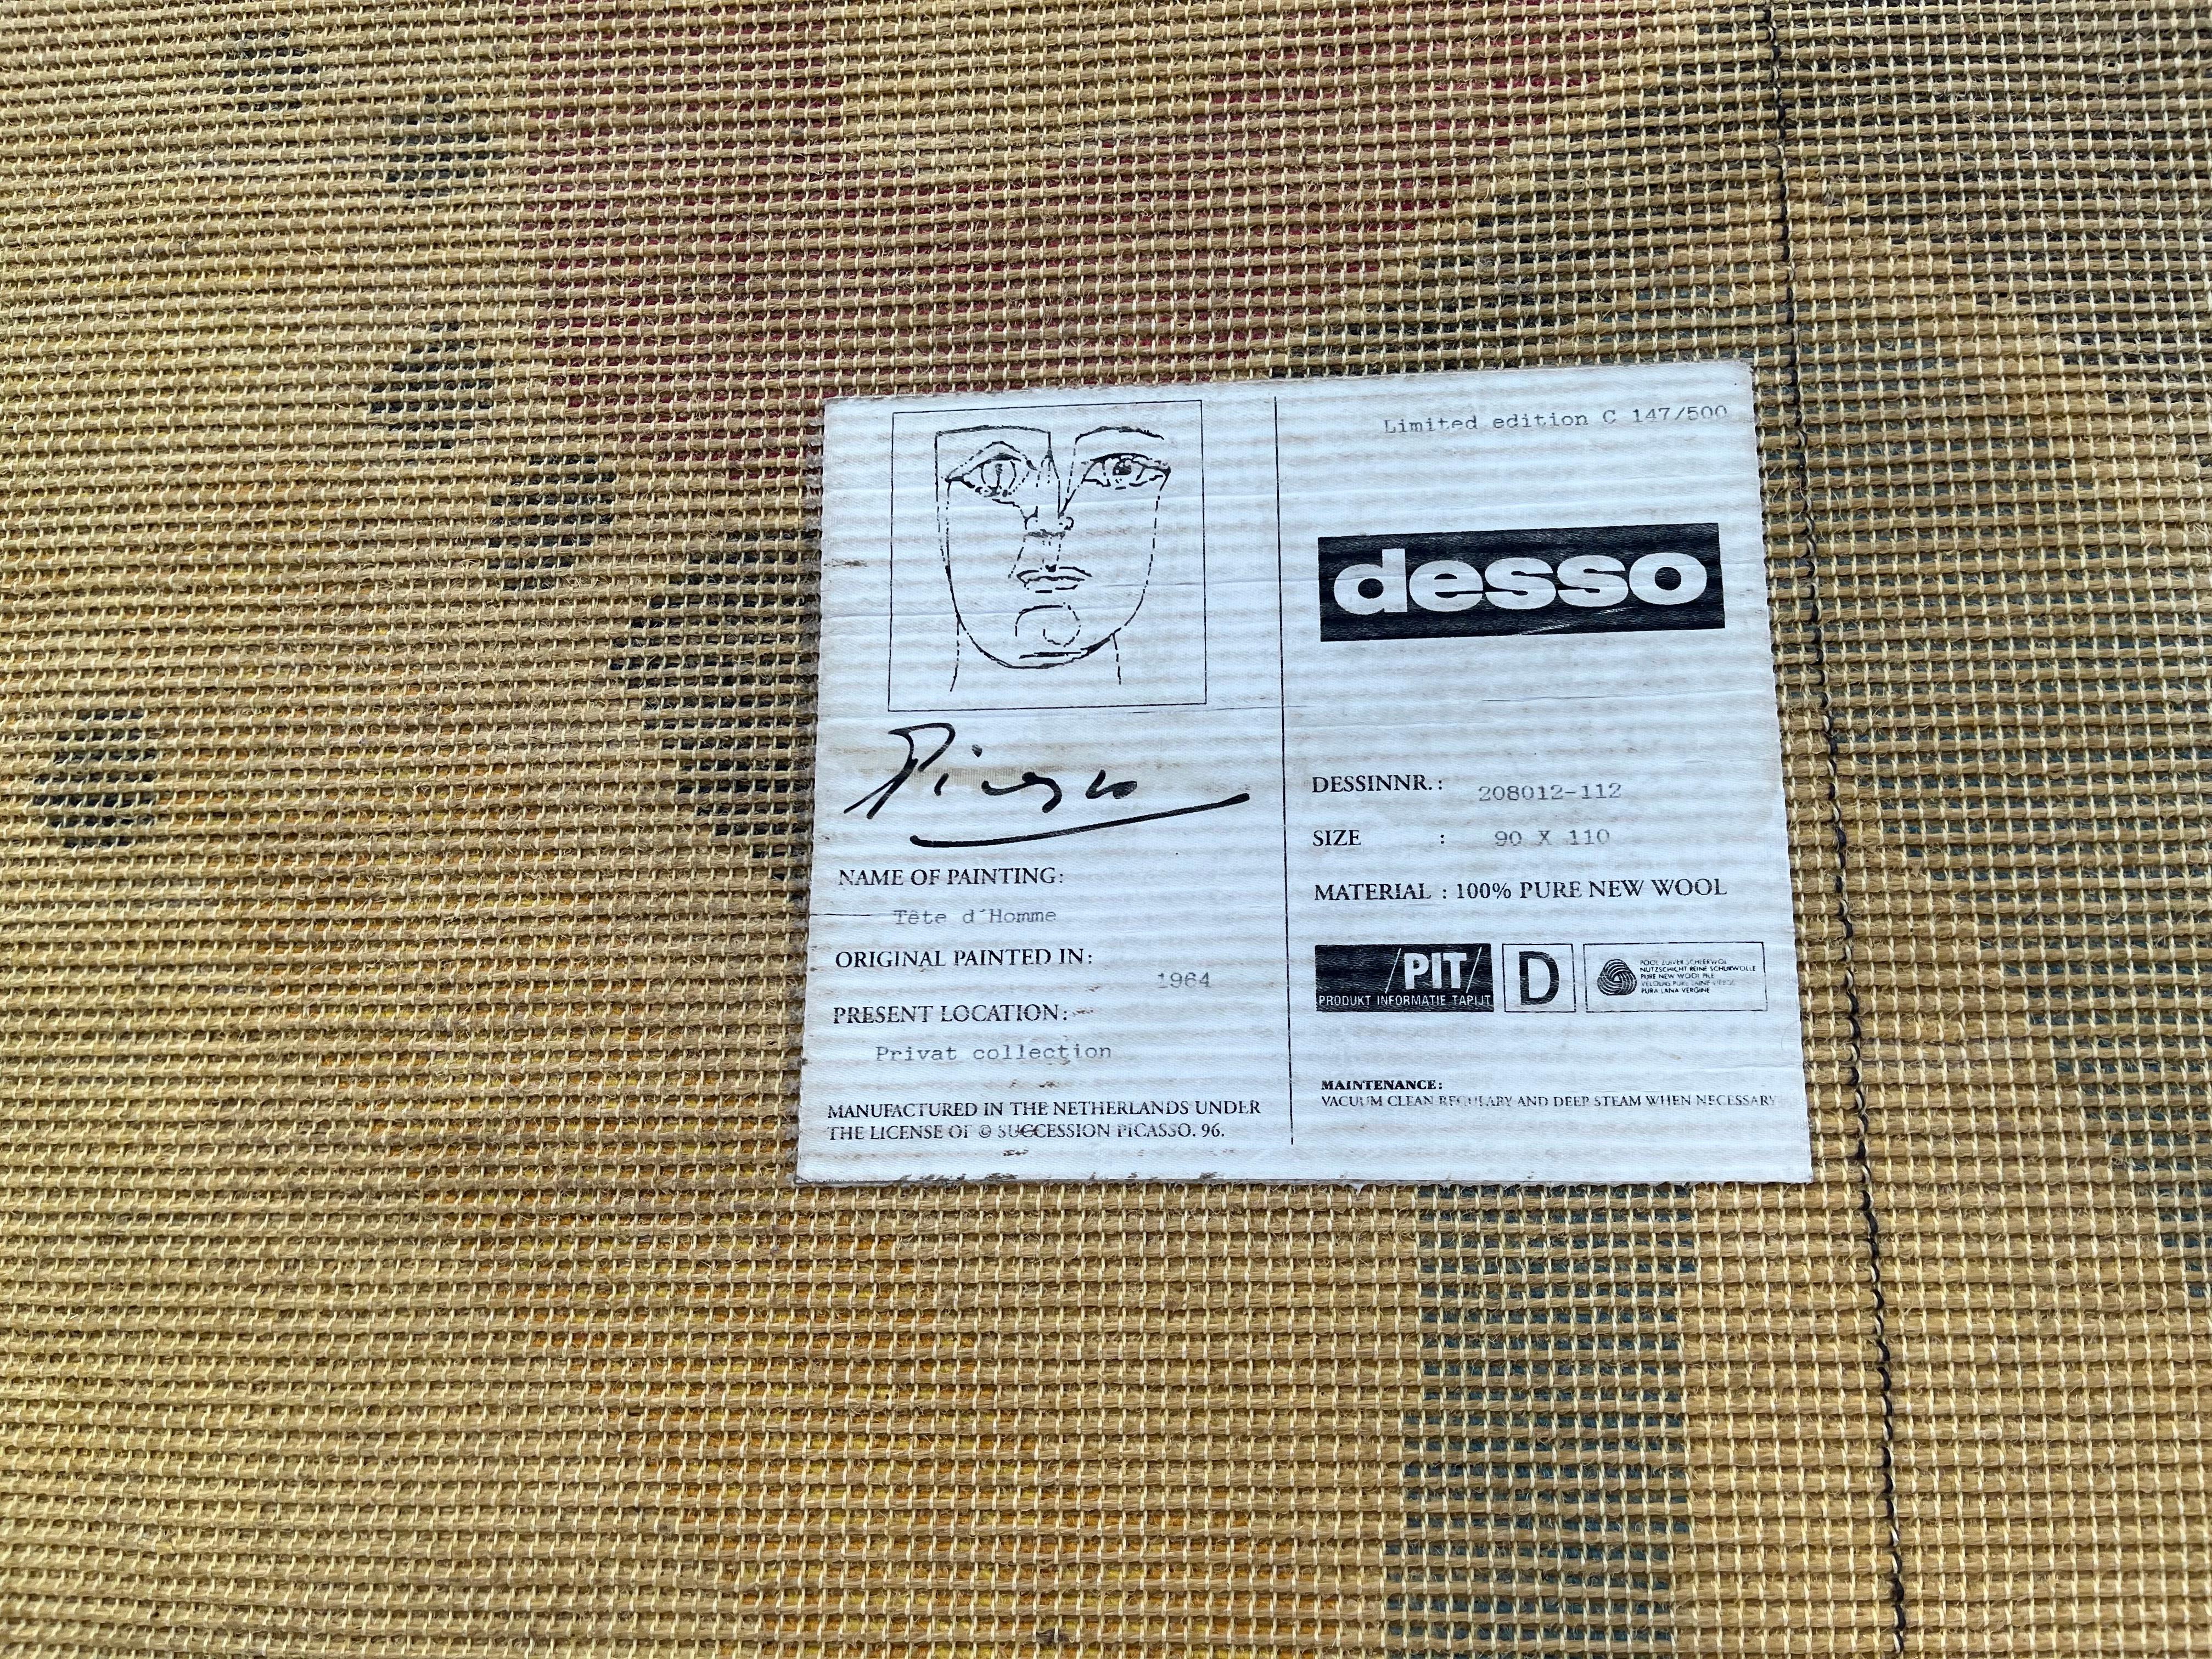 Picasso Wall Rug for Desso Limited Edition For Sale 5